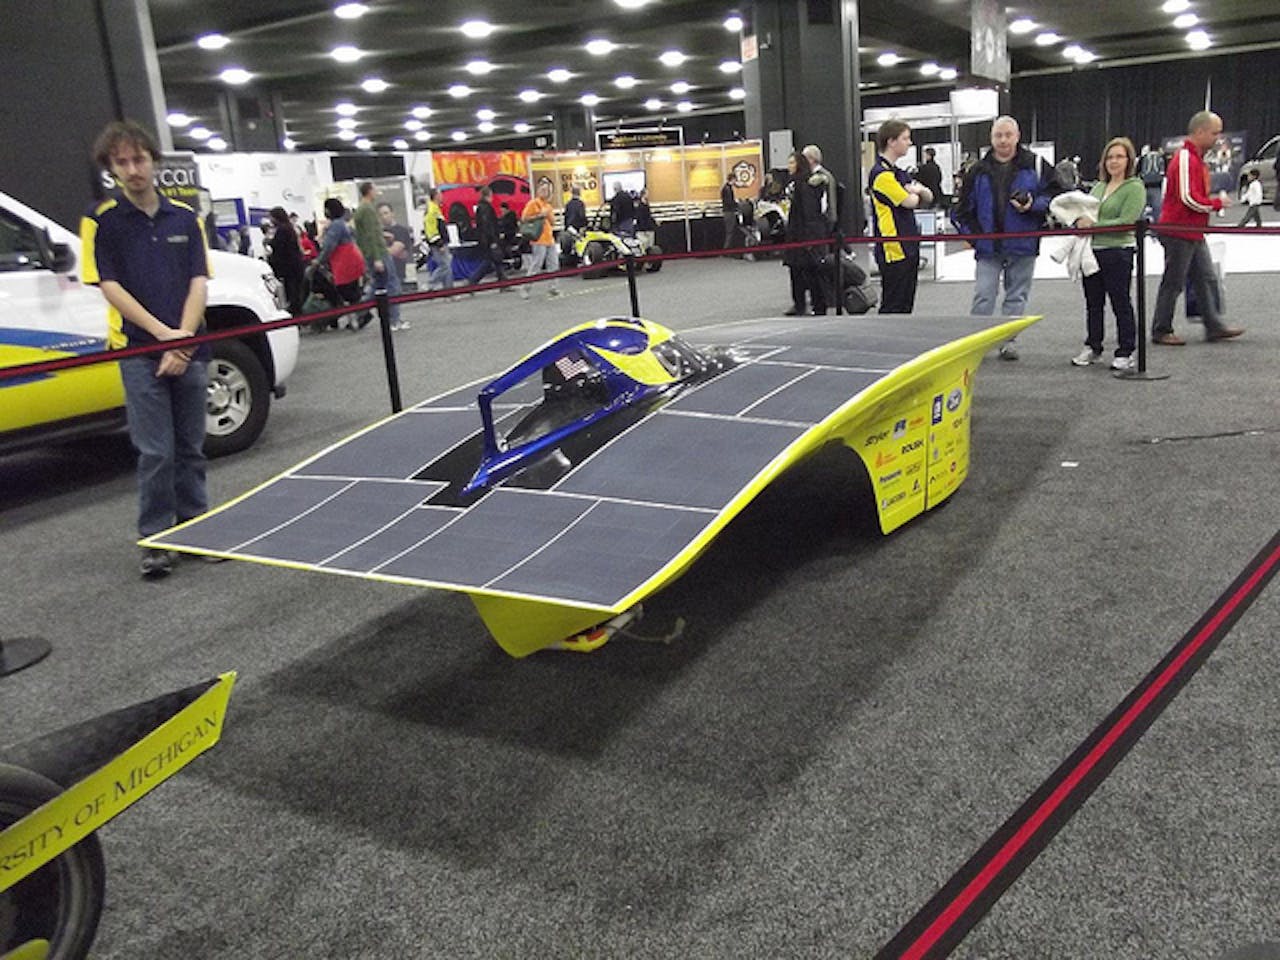 Hanergy launches solar-powered vehicles | News | Eco-Business | Asia